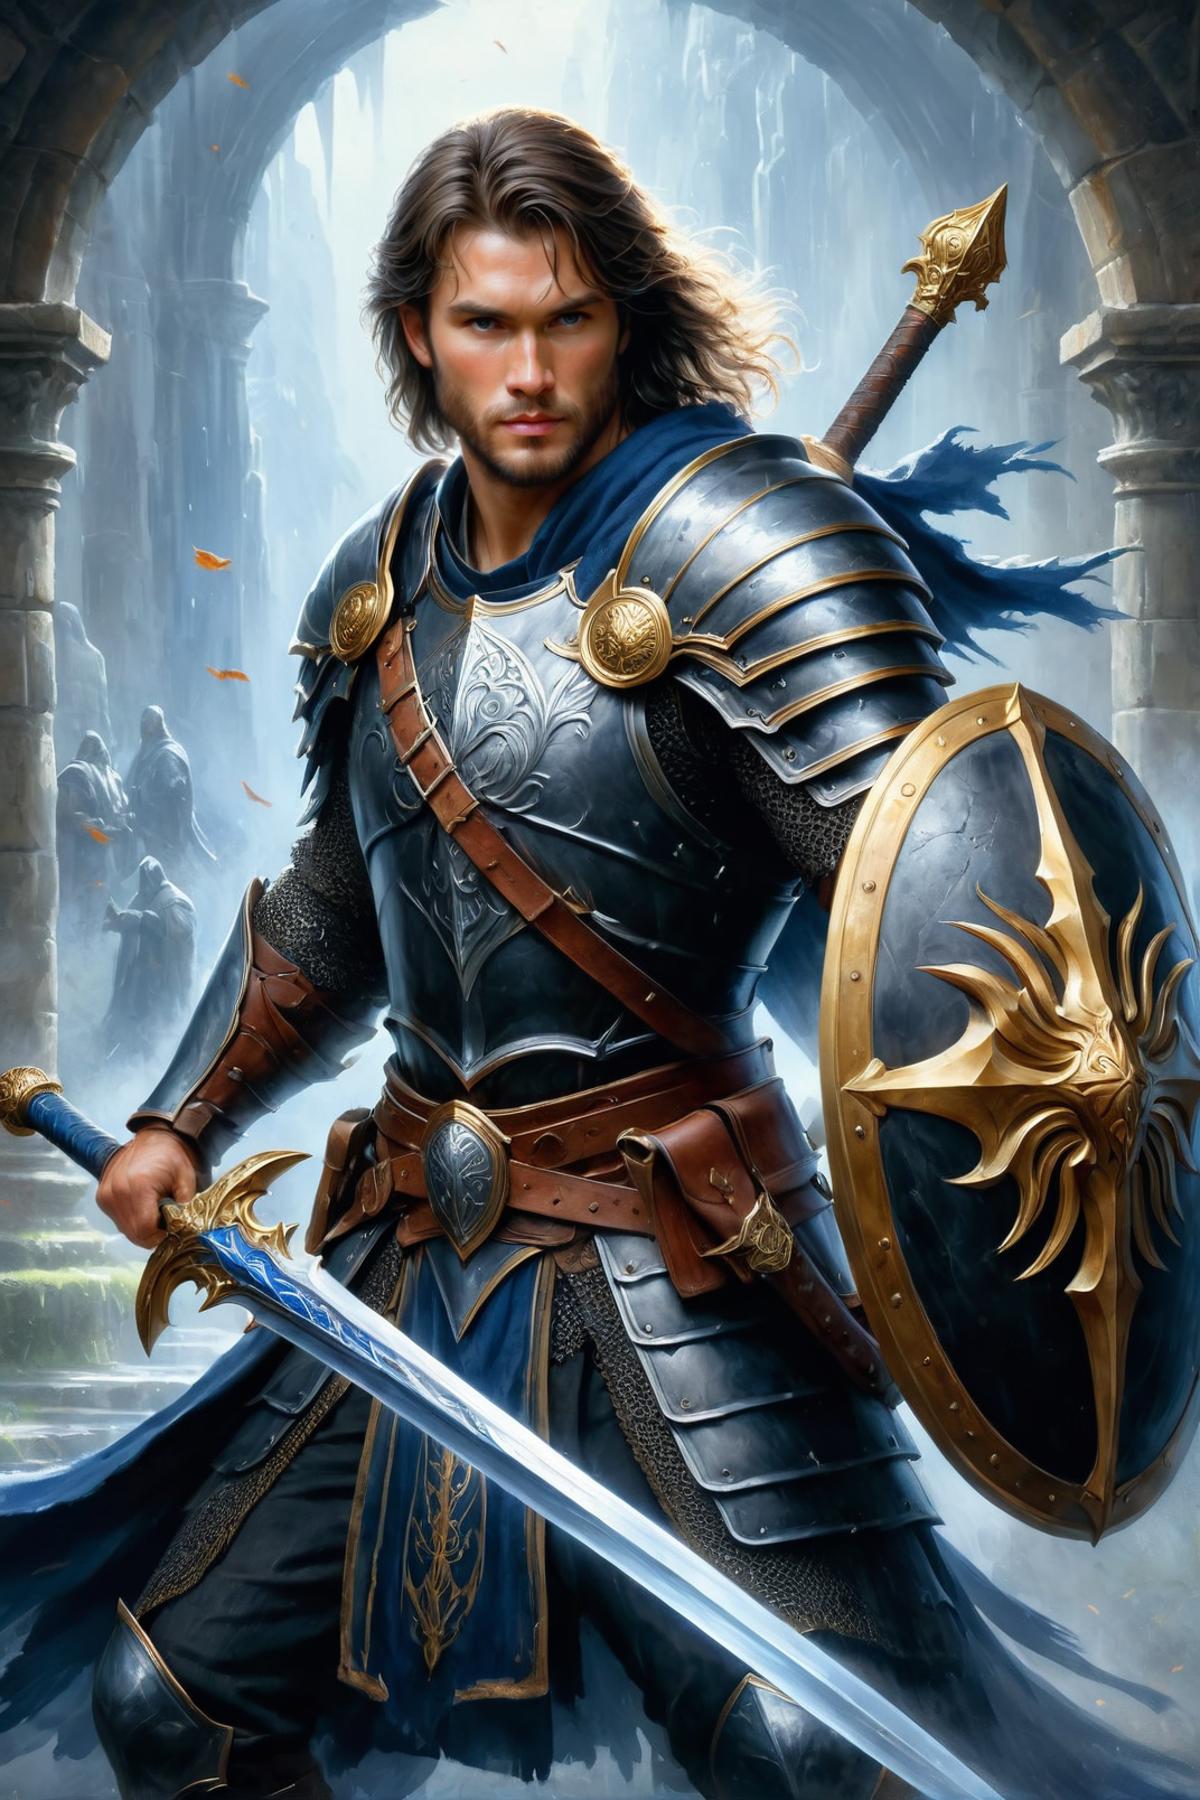 A warrior in a suit of armor holding a sword and a shield.